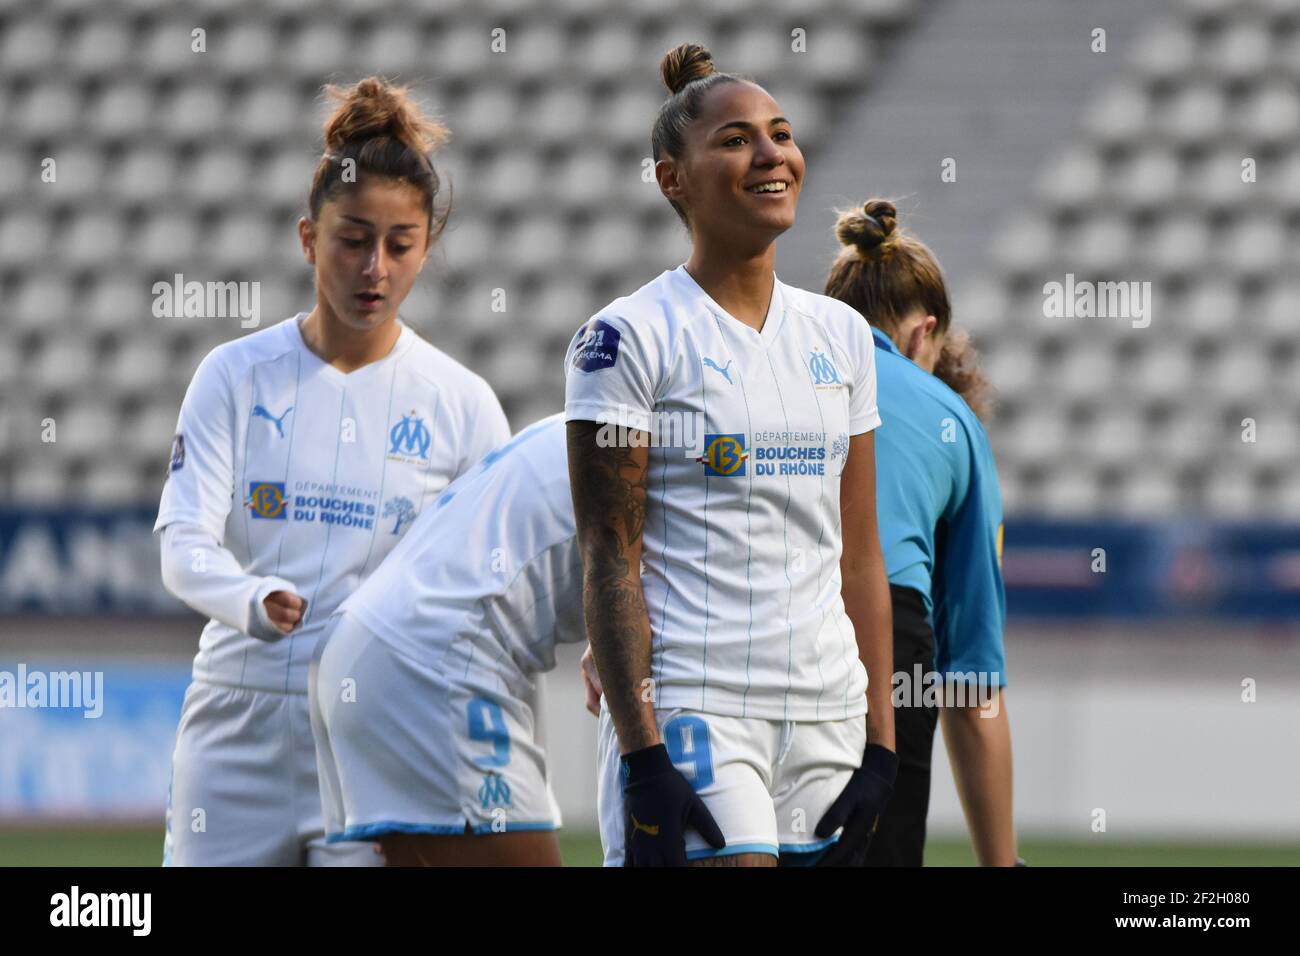 Eva Sumo of Olympique de Marseille reacts during the Women's French  championship D1 Arkema football match between Paris Saint-Germain and Olympique  Marseille on January 18, 2020 at Jean Bouin stadium in Paris,